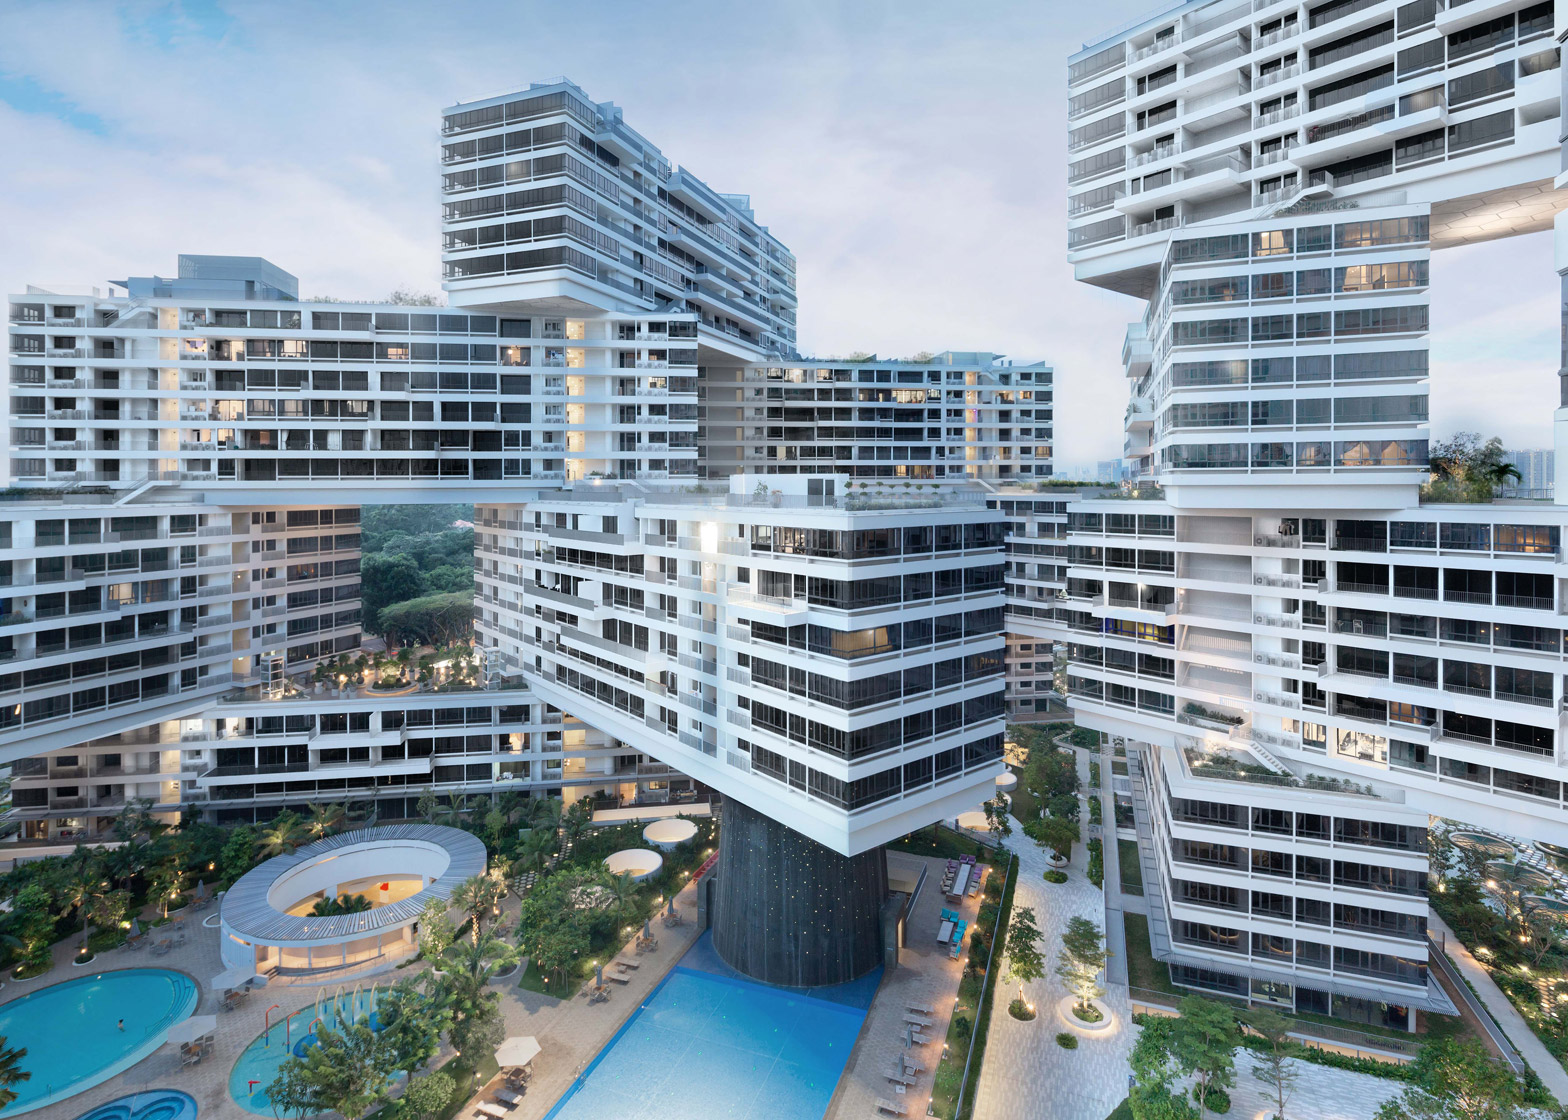 We're getting there  Sands singapore, Singapore city, Amazing architecture